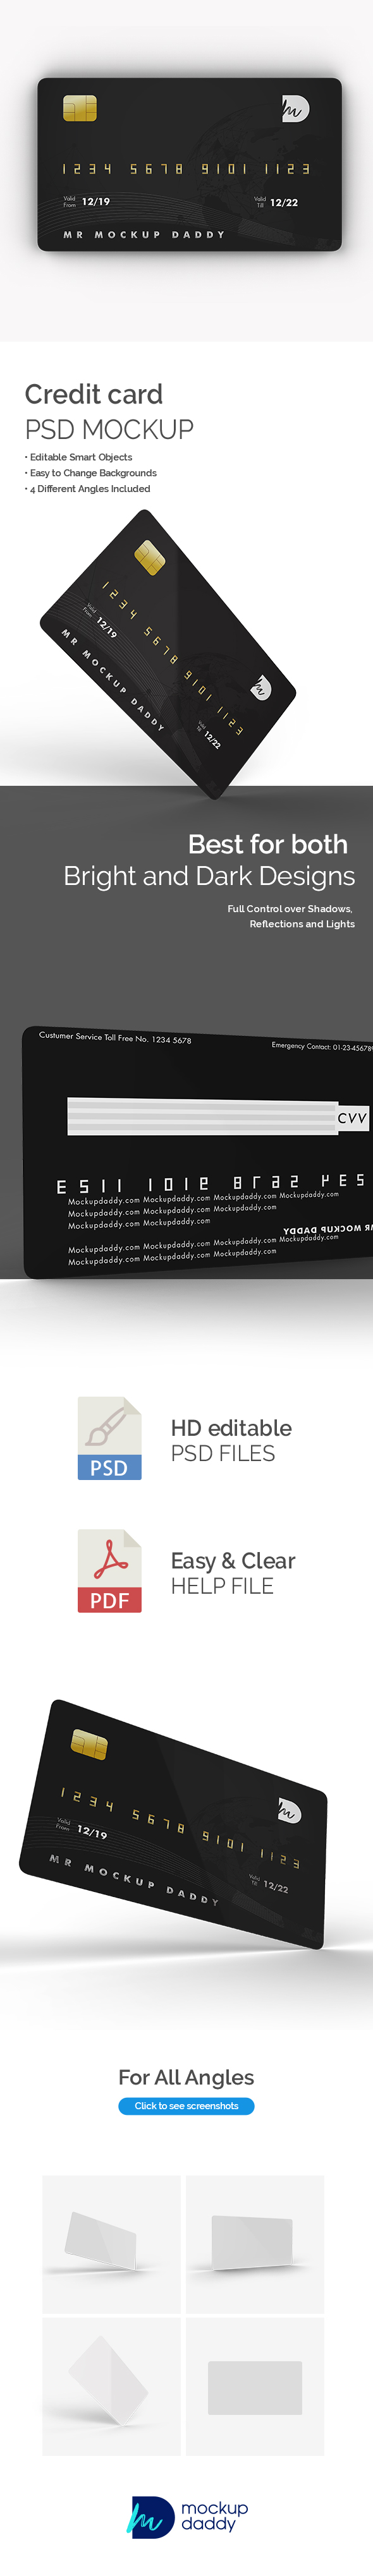 Credit Card Mockup Featured